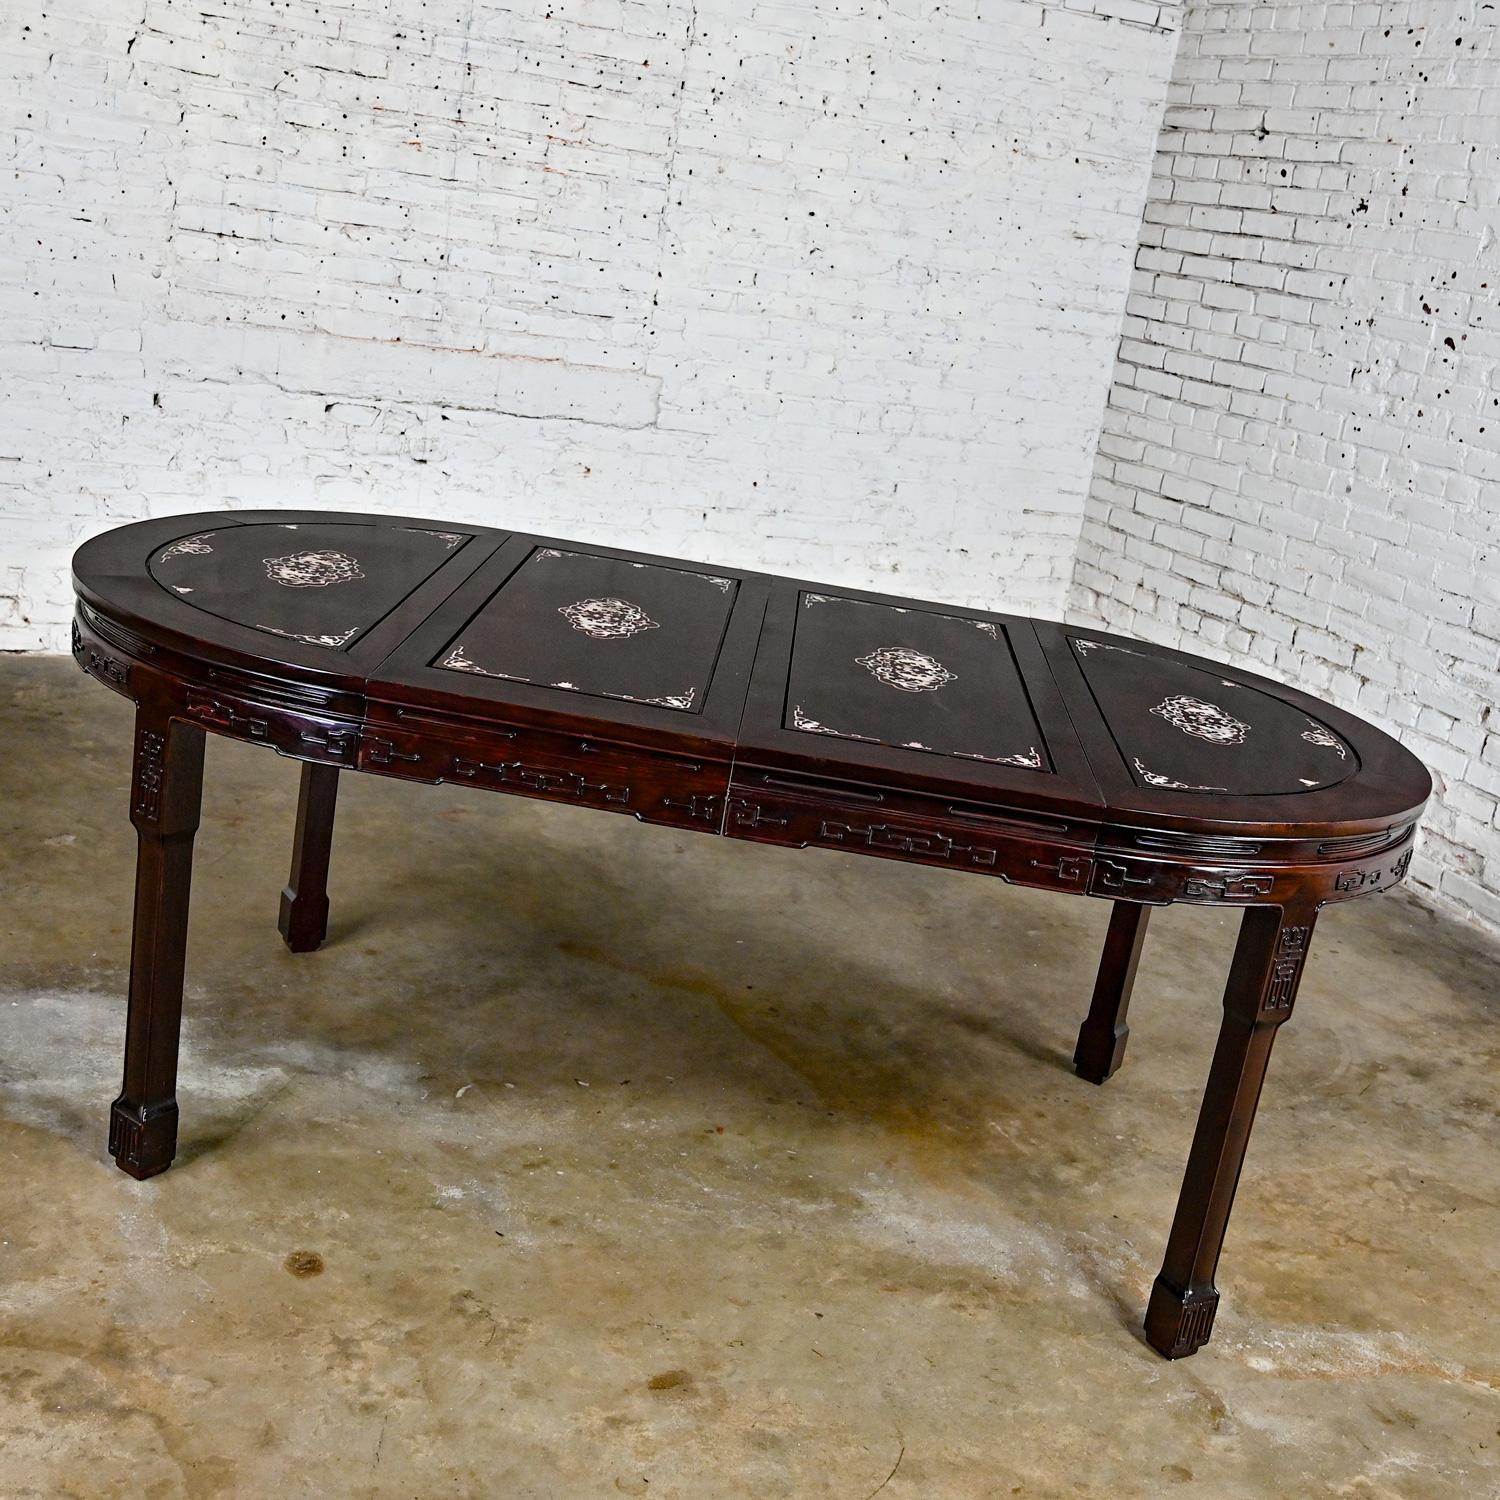 Wonderful vintage Chinese Chinoiserie dining table comprised of Rosewood & Mother of Pearl (m-o-p) round top with 2 leaves, converting it to a small oval with one leaf and large oval with 2 leaves. Beautiful condition, keeping in mind that this is